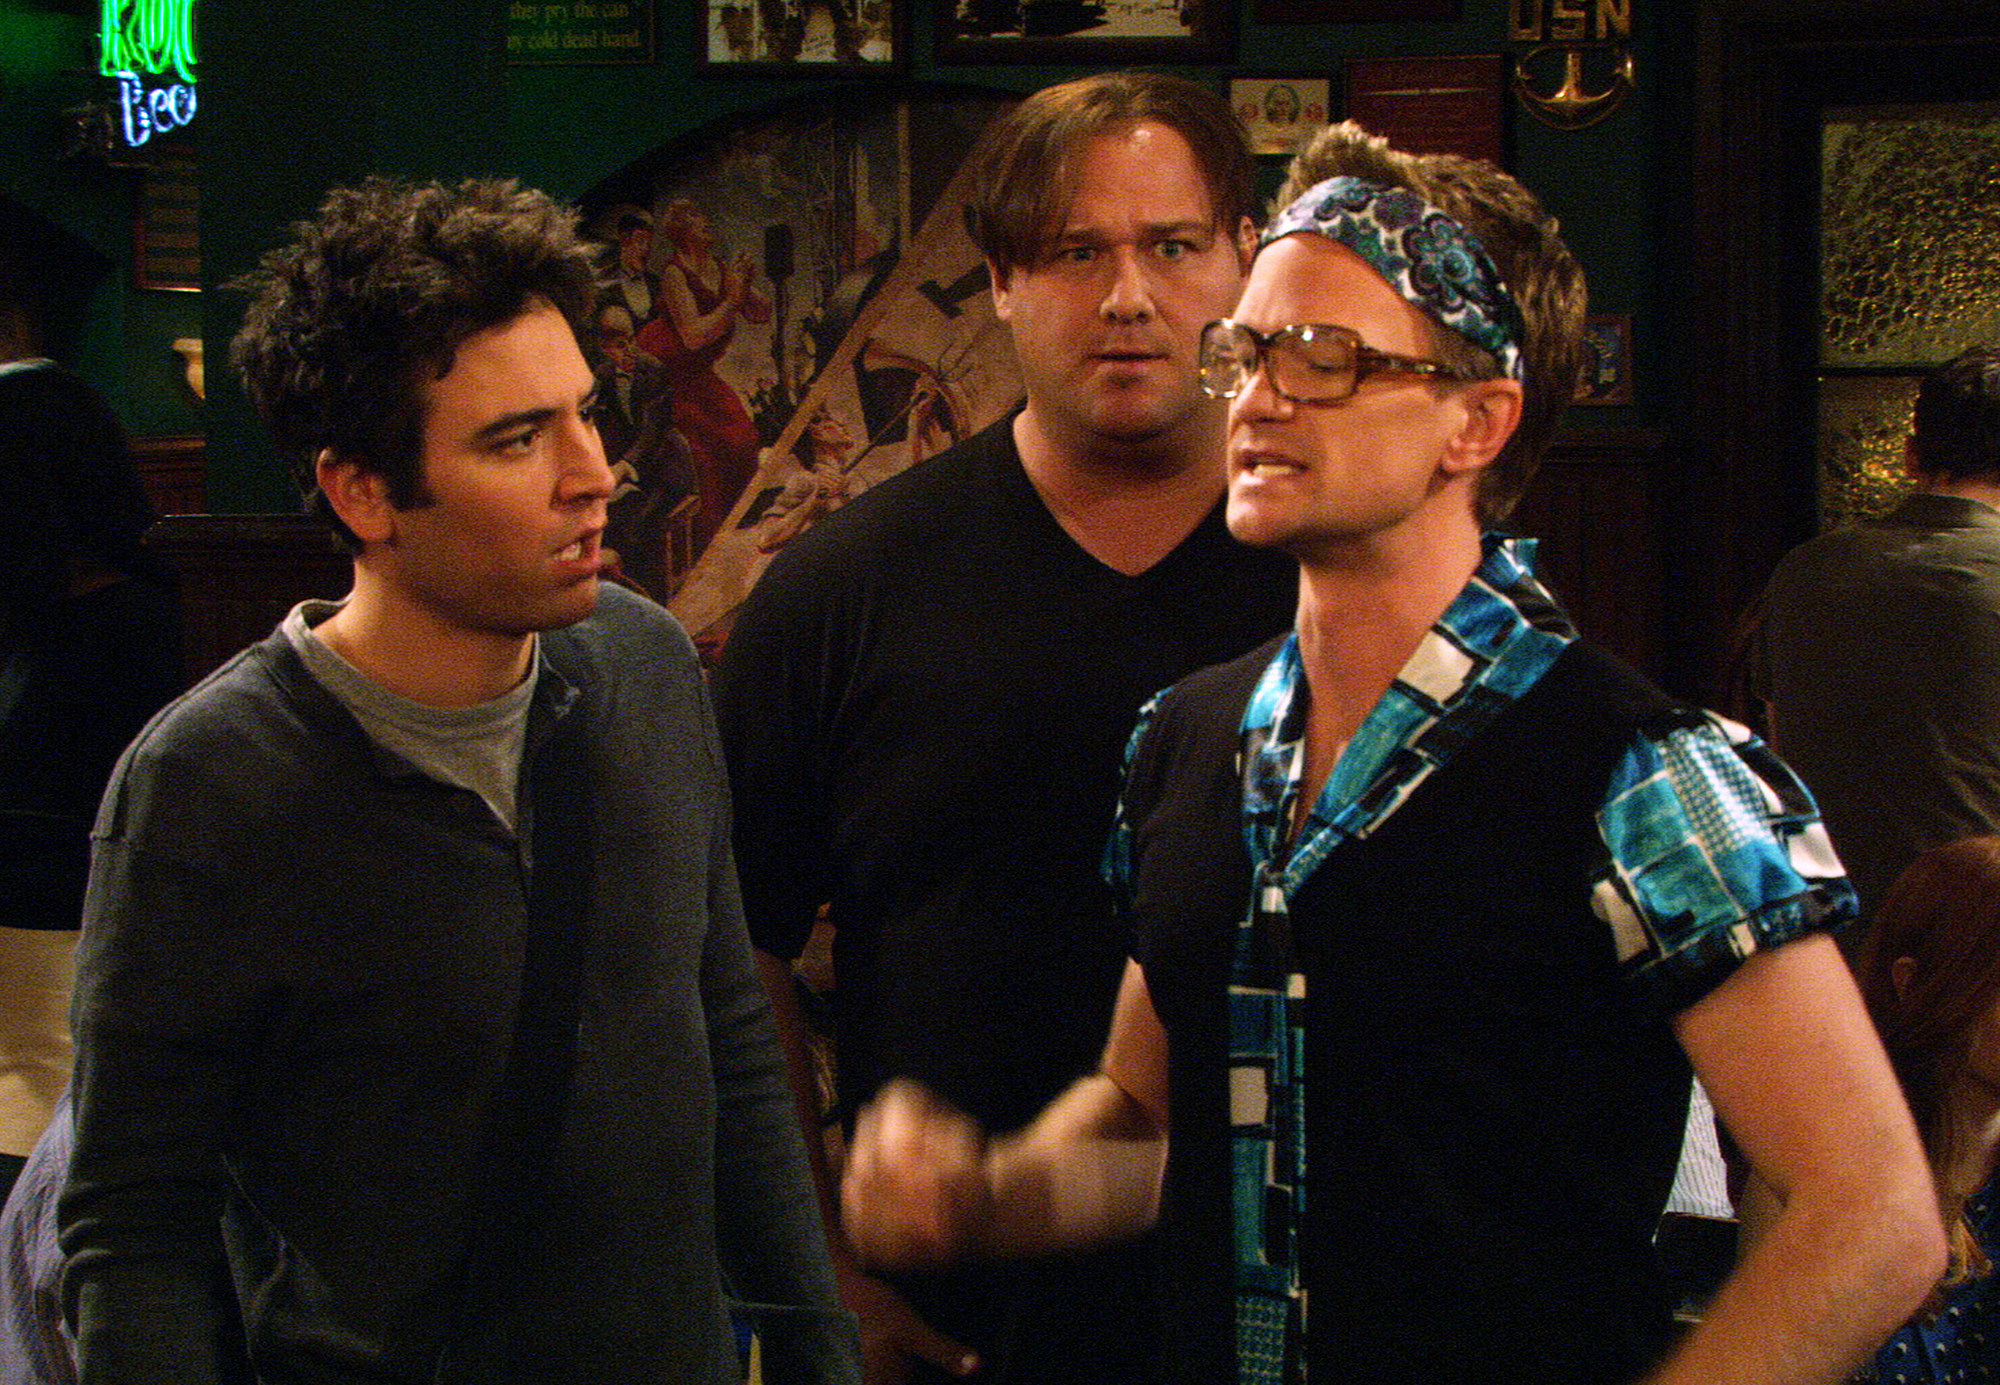 Photos - 4x10 - The Fight - How I Met Your Mother Photo (2937780) - Fanpop